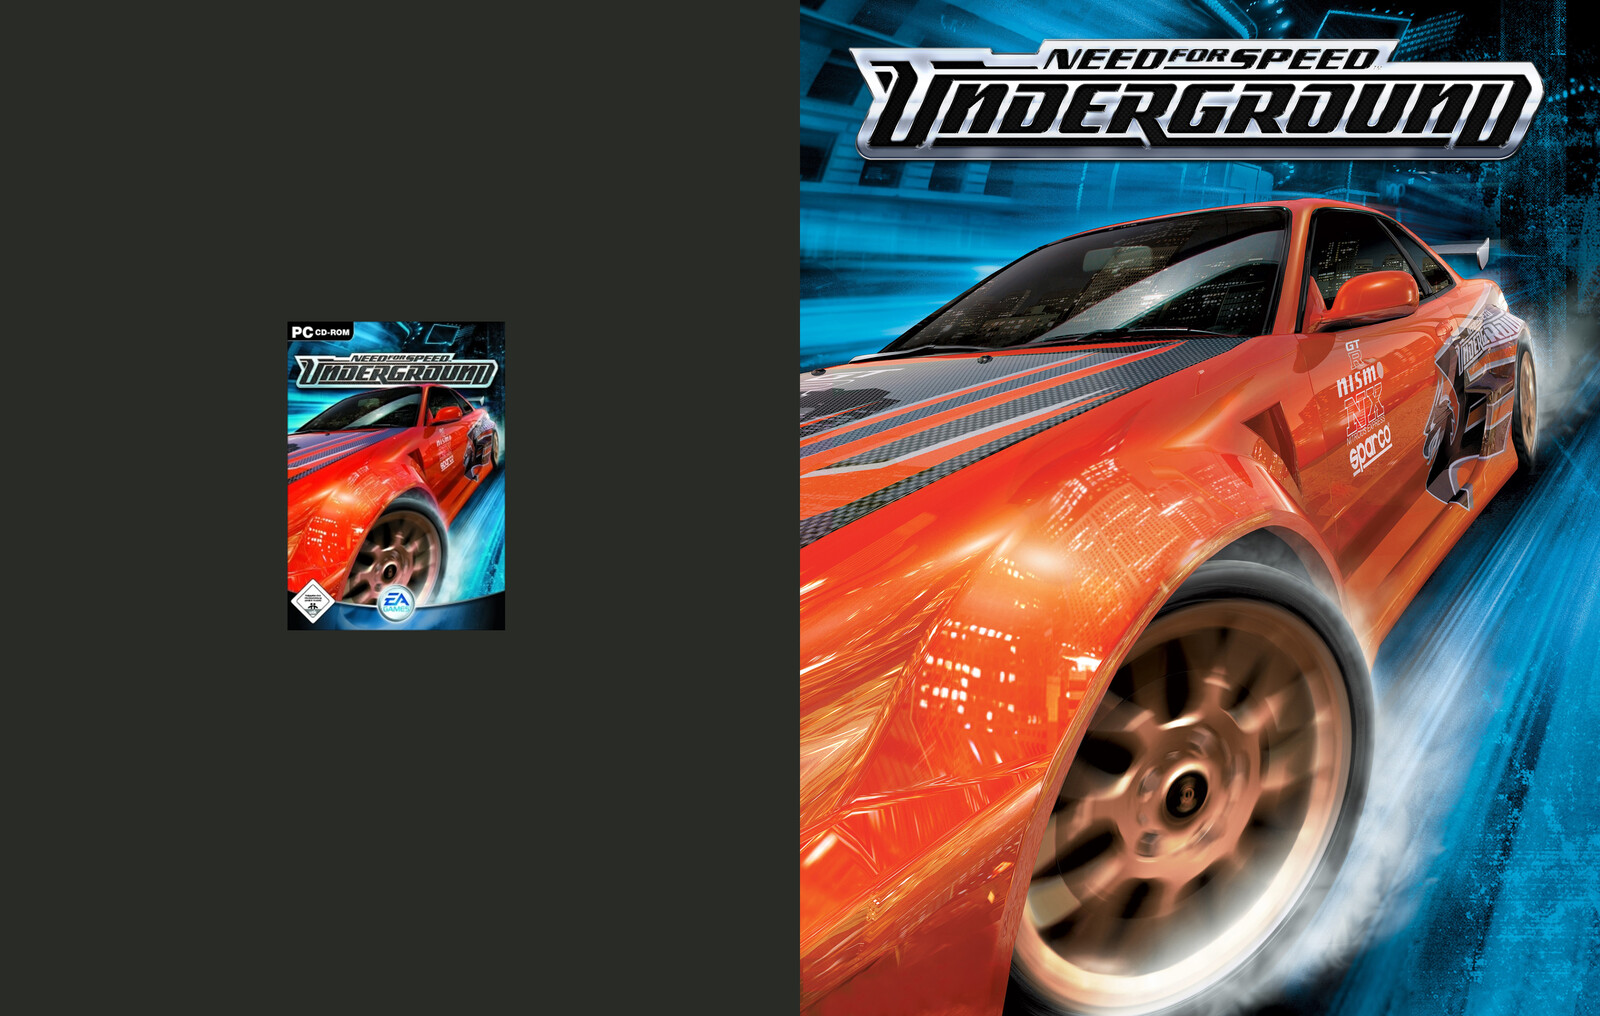 Need for Speed; Underground (Original Scan vs. Poster format)